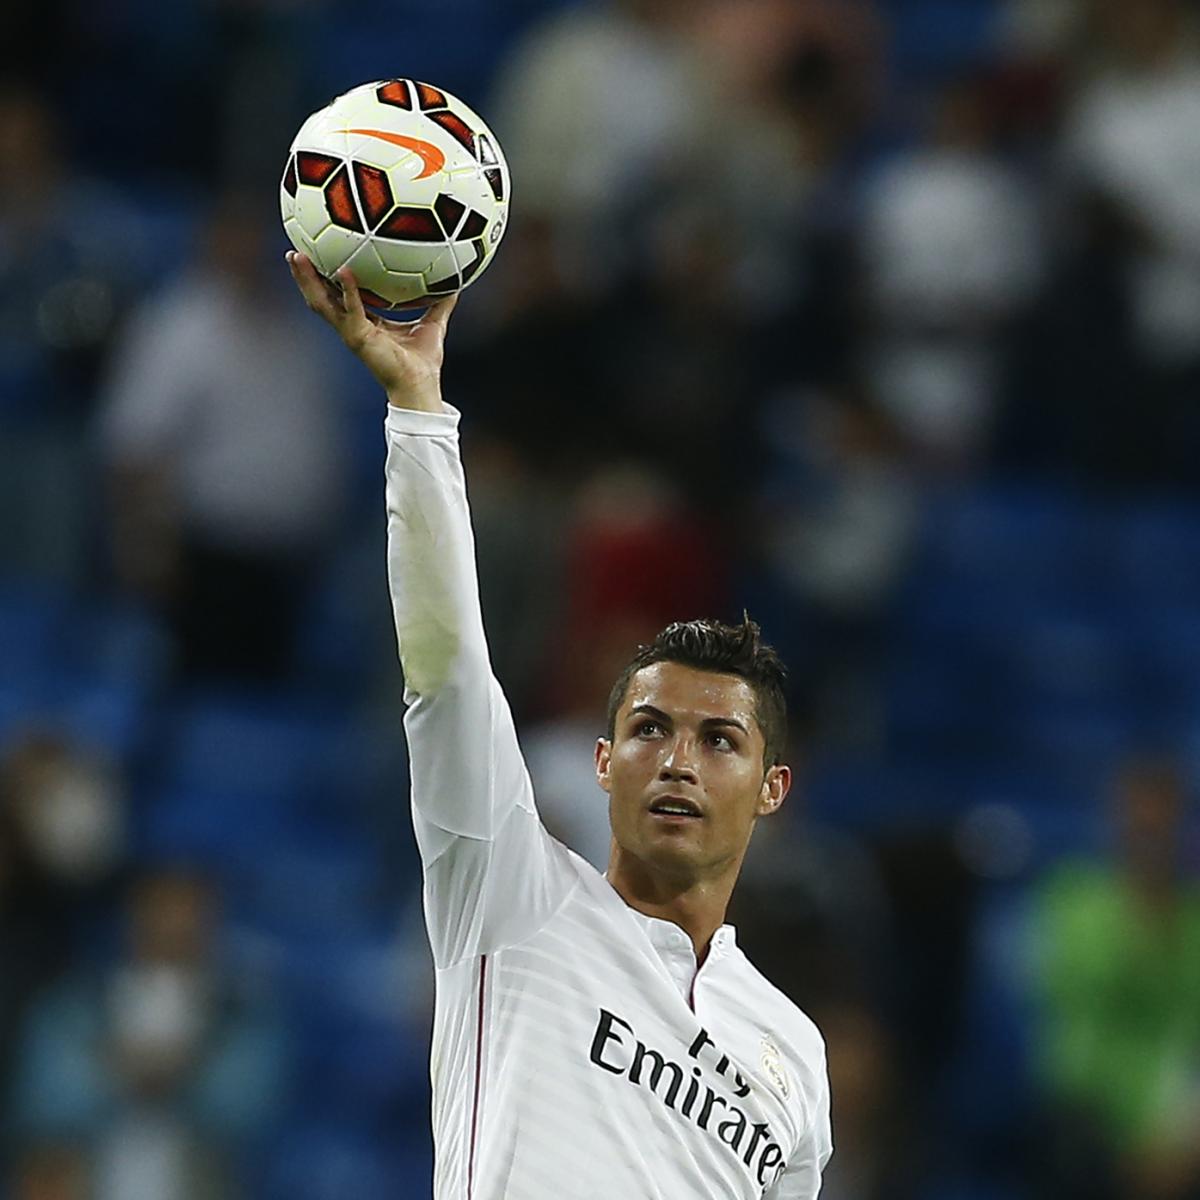 Cristiano Ronaldo Film Is a Tale of Ego, Loneliness and the Quest for